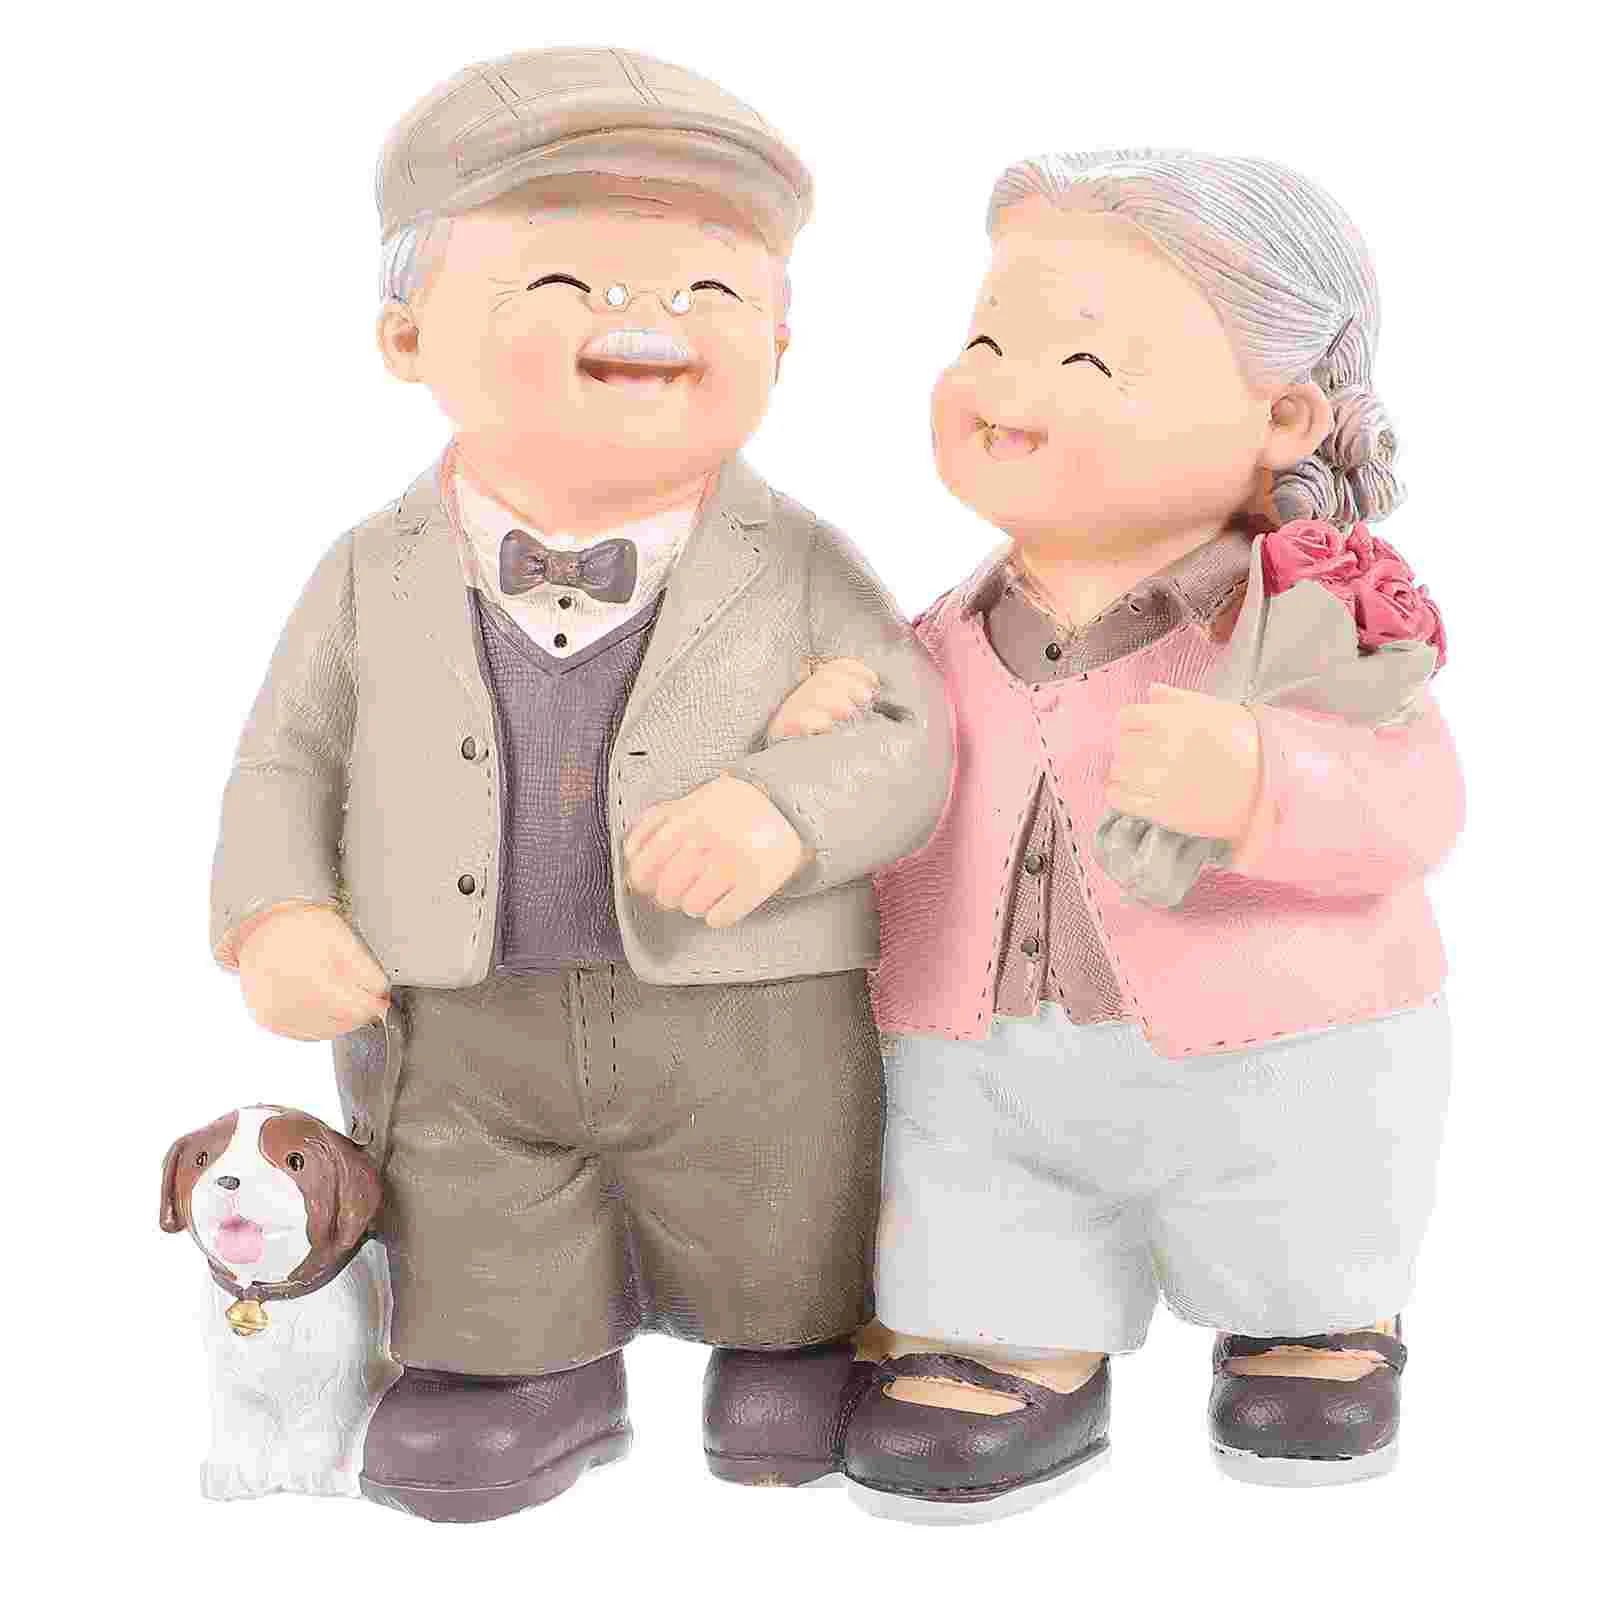 

Old Man Granny Ornaments Home Decorations Lovely Adornment Multi-color Elderly Couple Crafts Eye-catching Wedding Resin